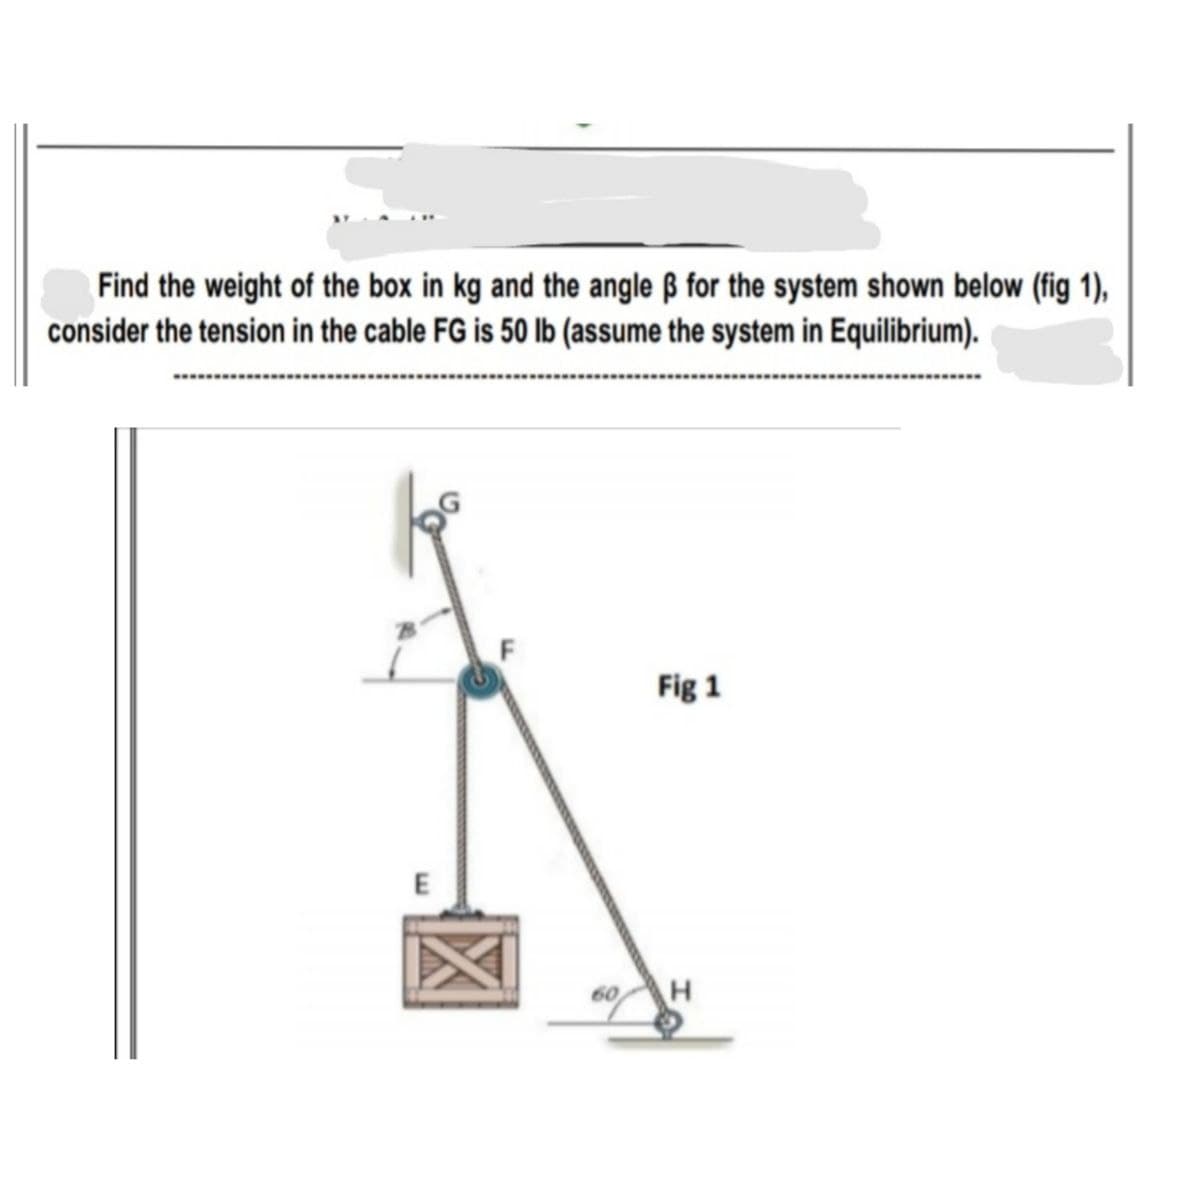 Find the weight of the box in kg and the angle ß for the system shown below (fig 1),
consider the tension in the cable FG is 50 lb (assume the system in Equilibrium).
Fig 1
60
